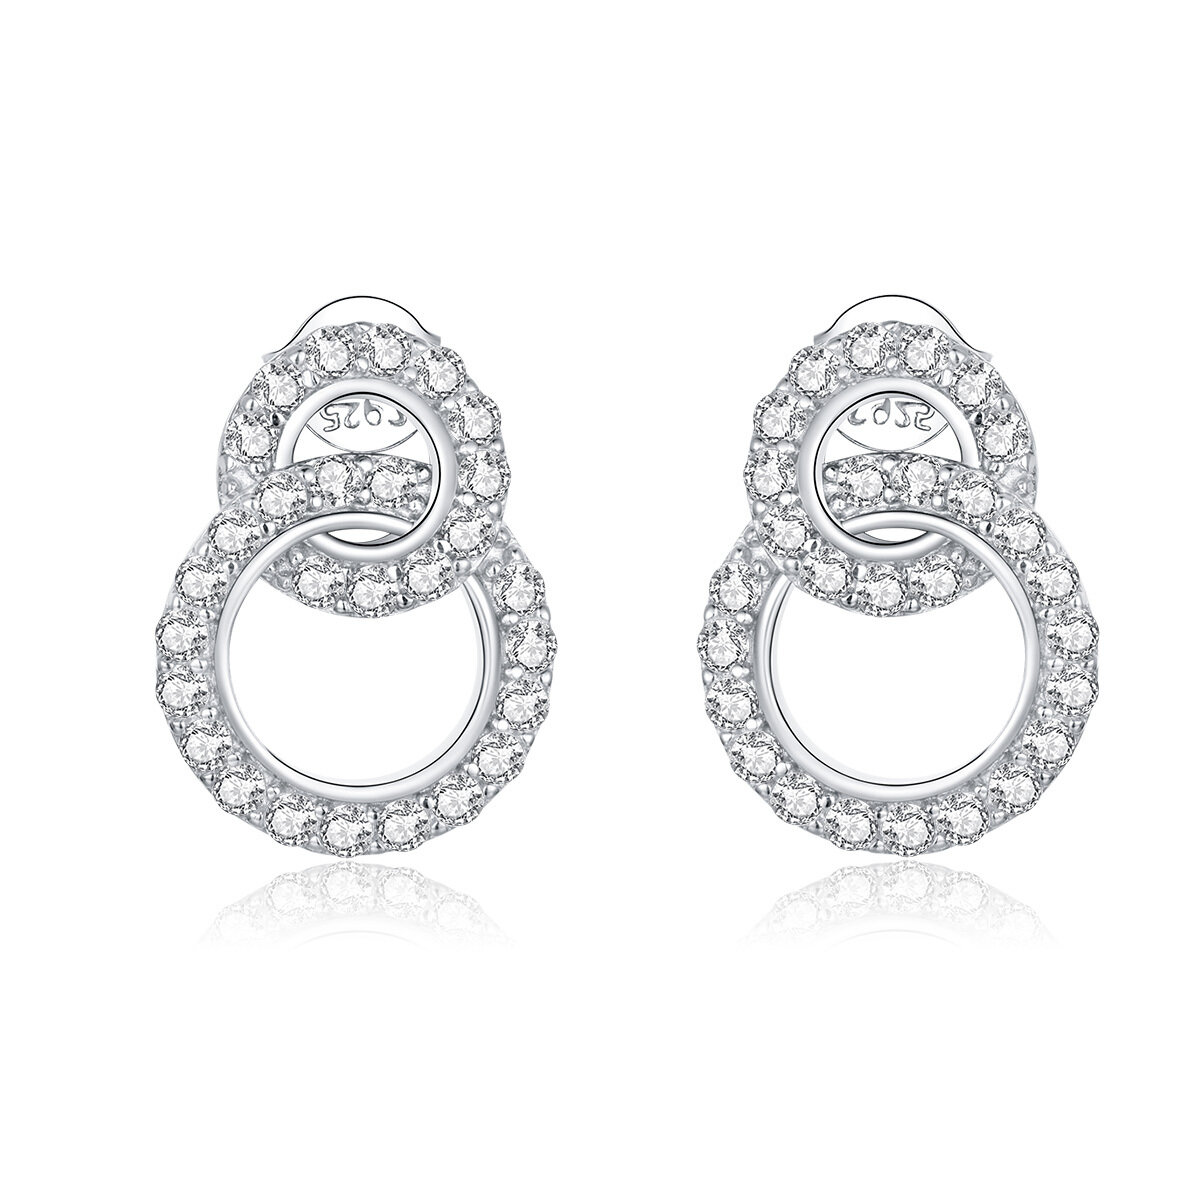 GemKing BSE388 Dazzling double ring S925 Sterling Silver Earring